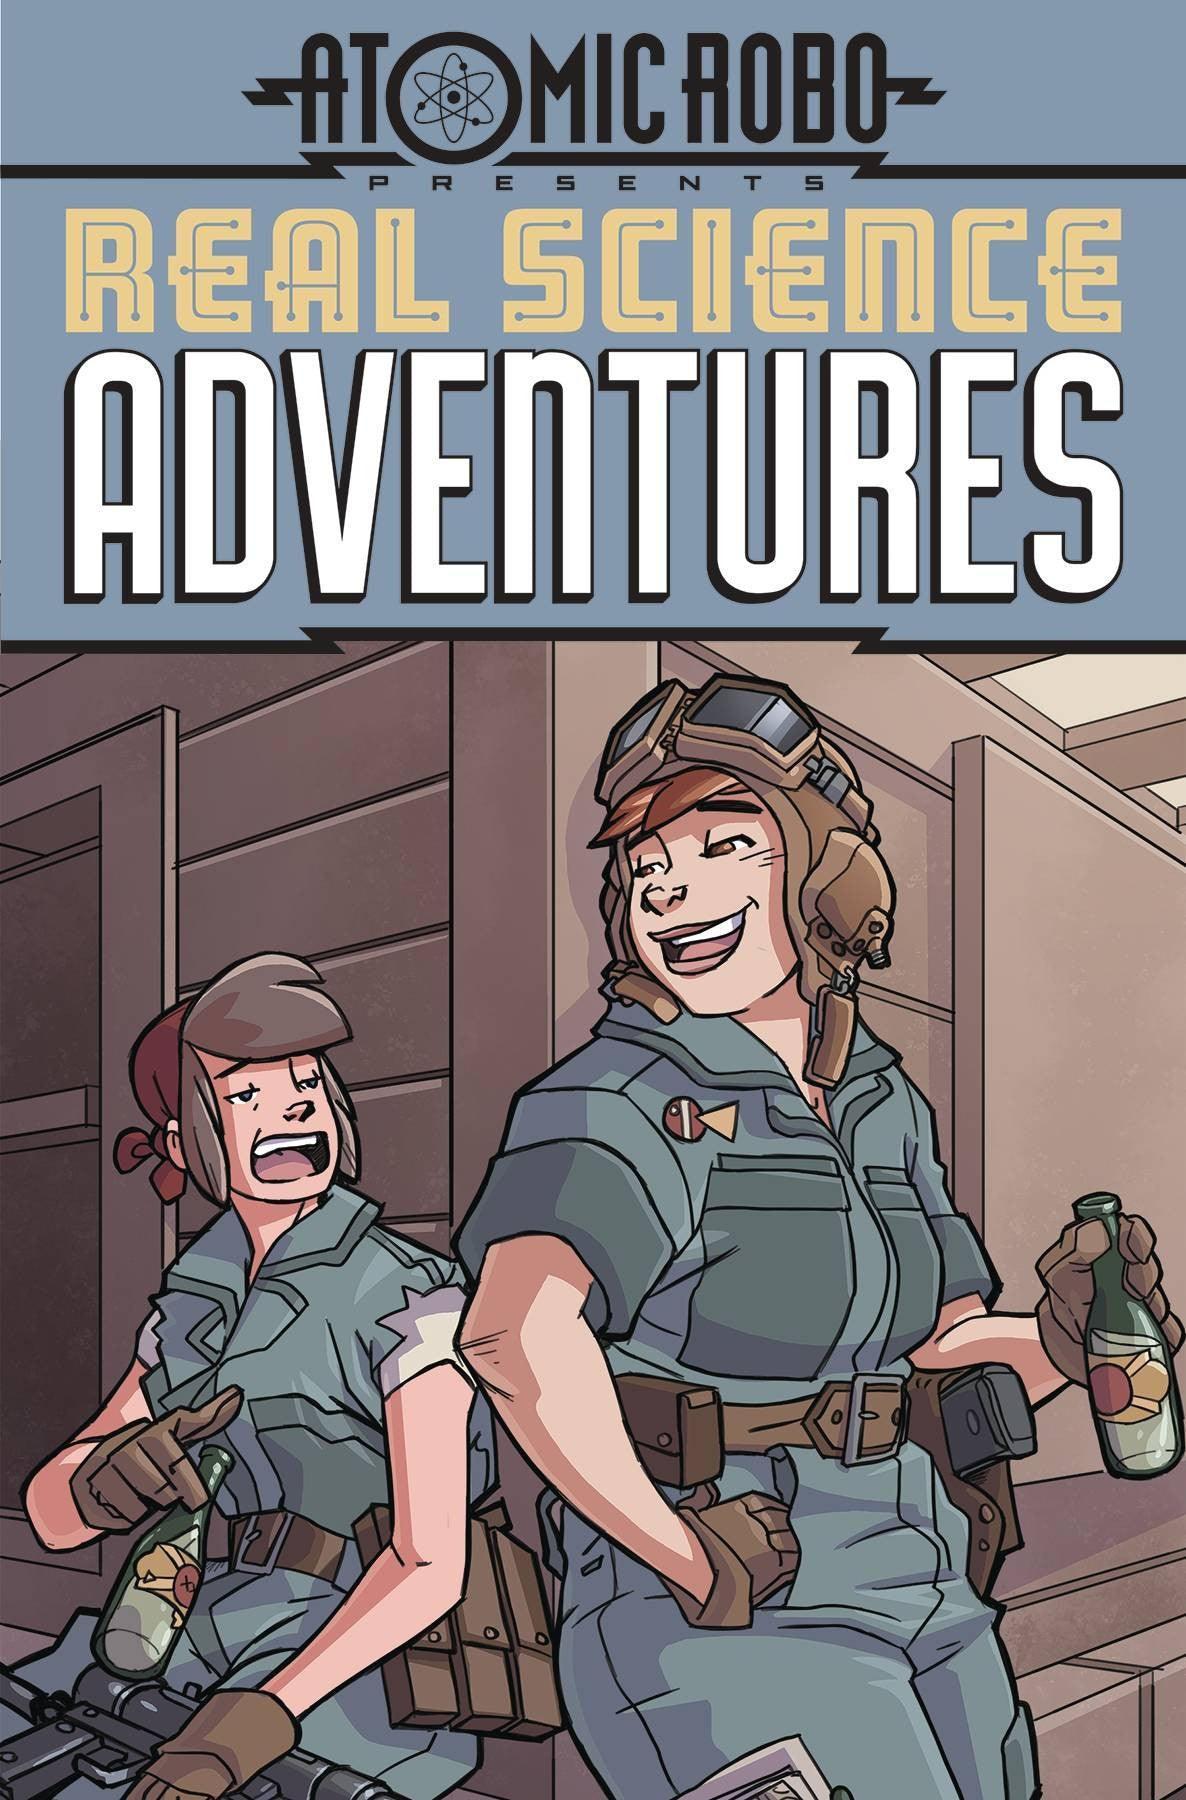 REAL SCIENCE ADVENTURES FLYING SHE-DEVILS #2 - Kings Comics